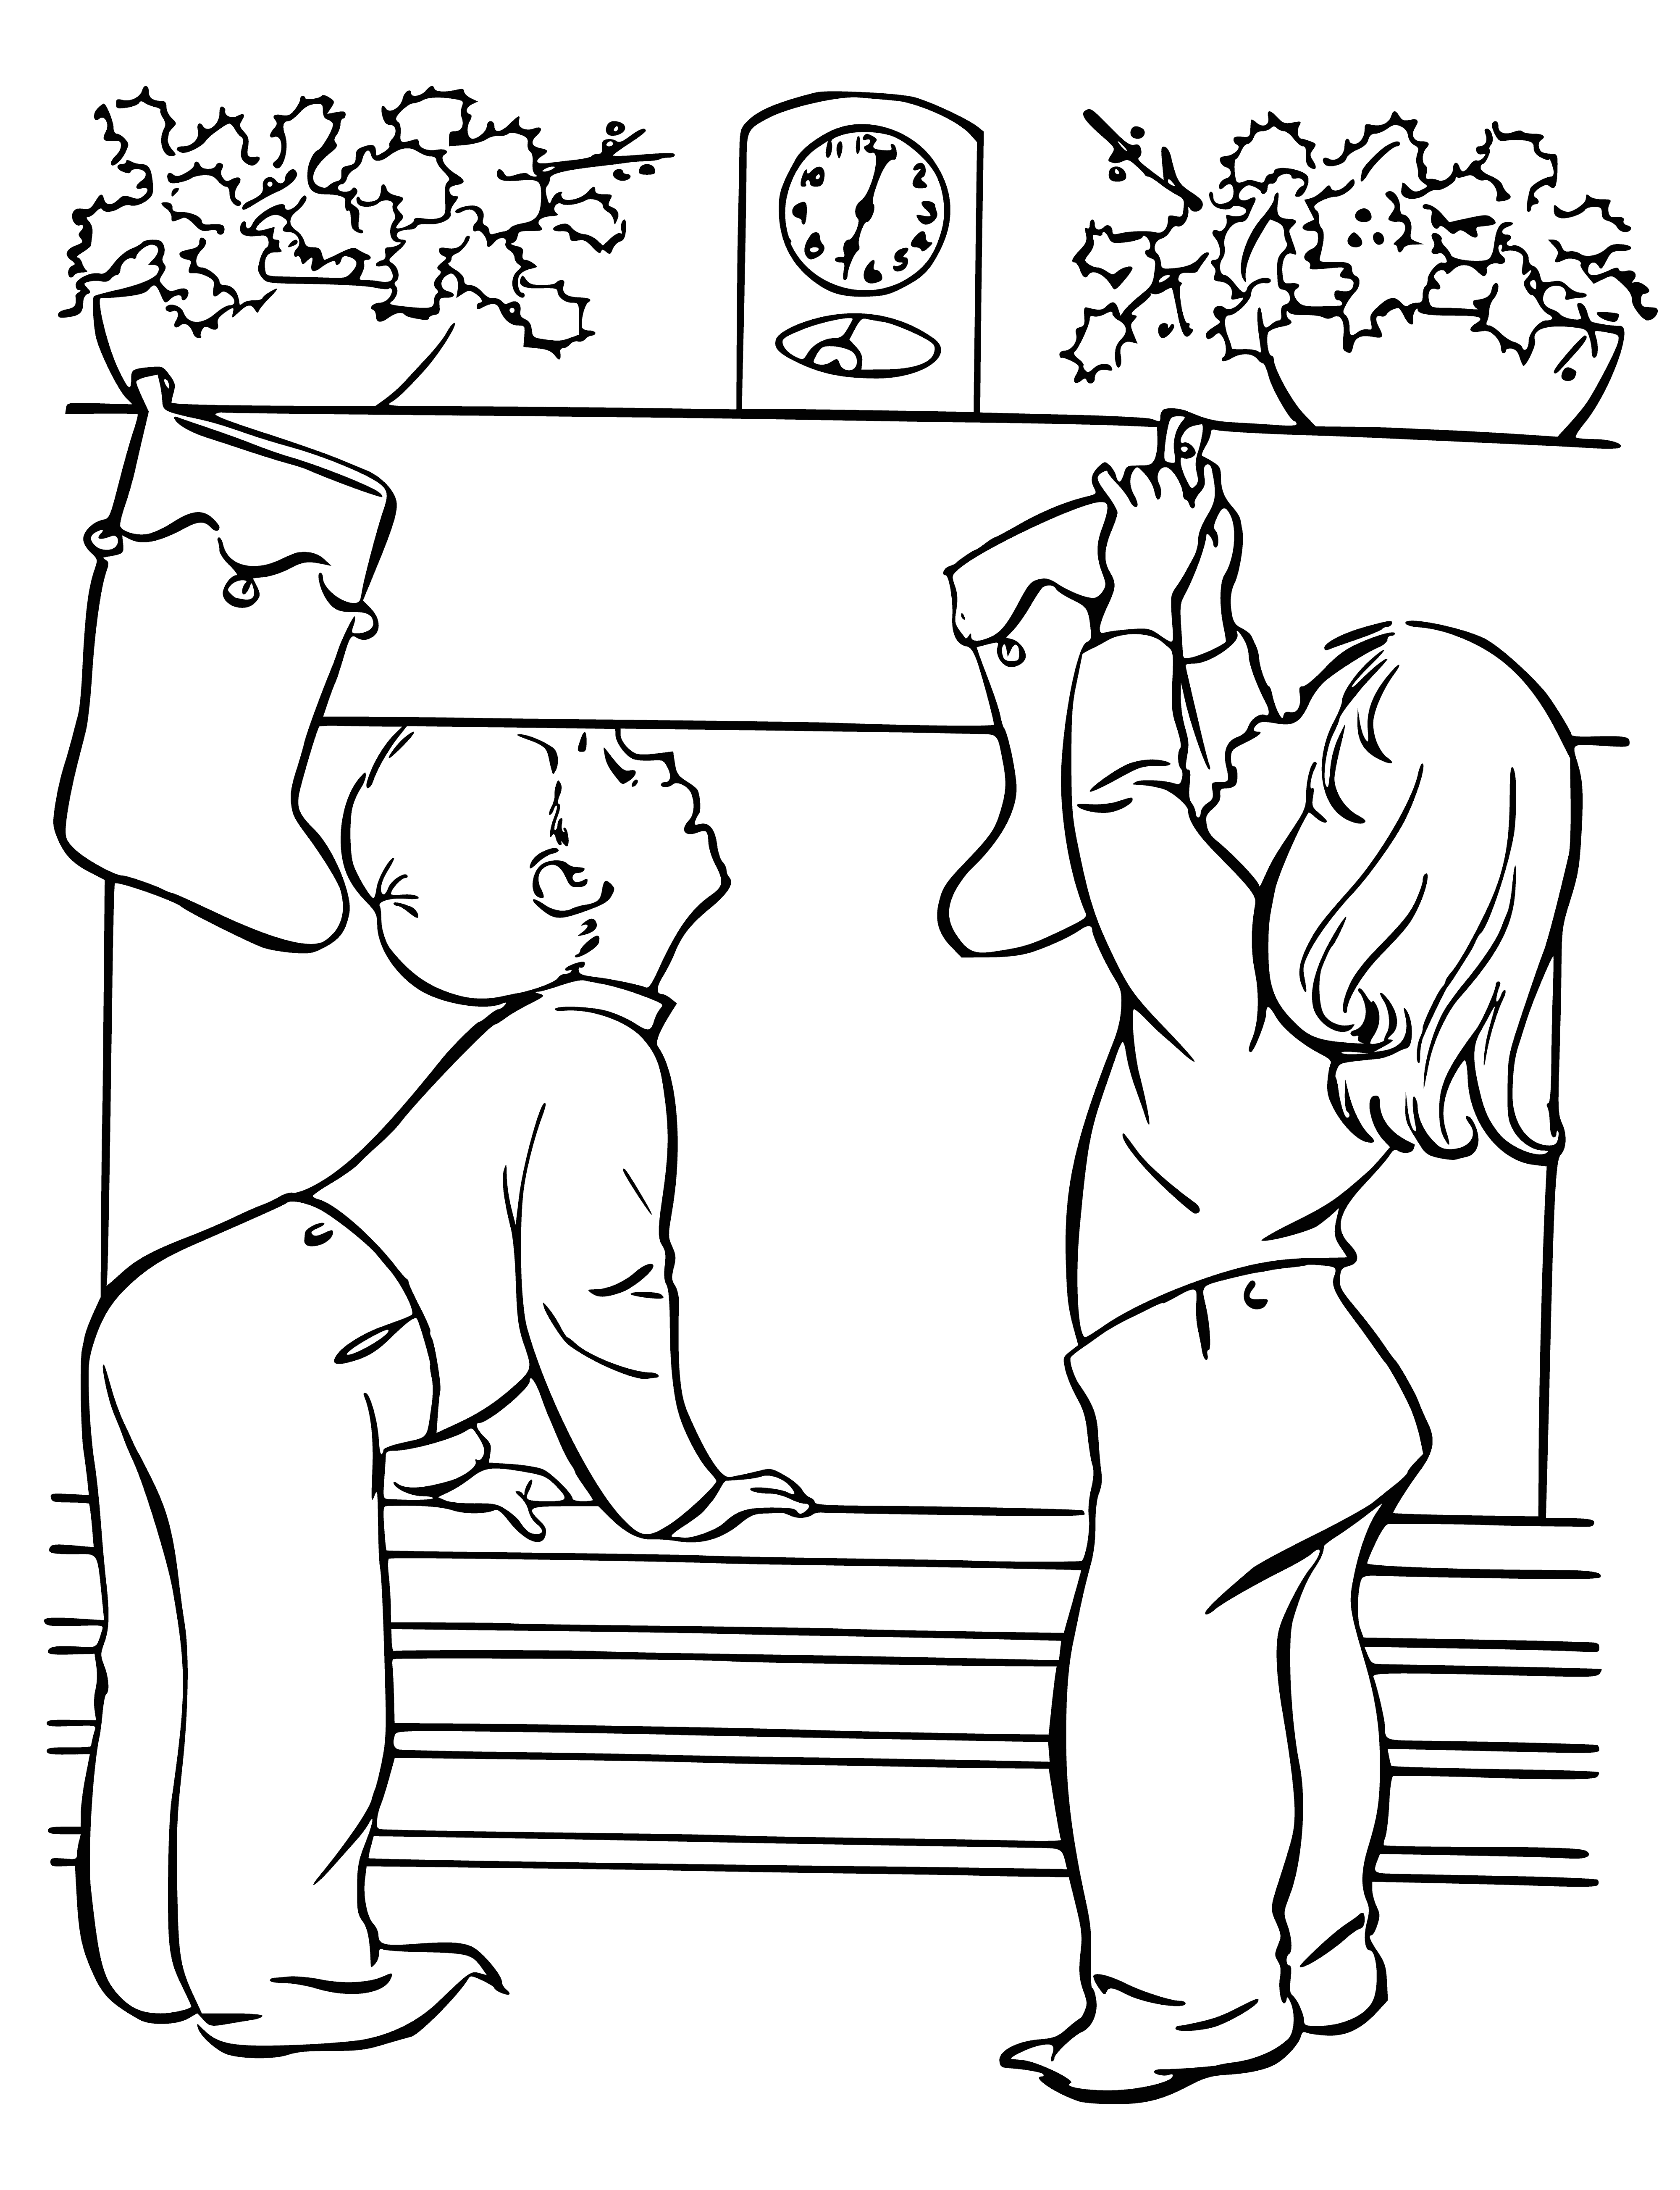 coloring page: Christmas fireplace w/burning log & presents filled socks, rug w/Christmas wreath in center.